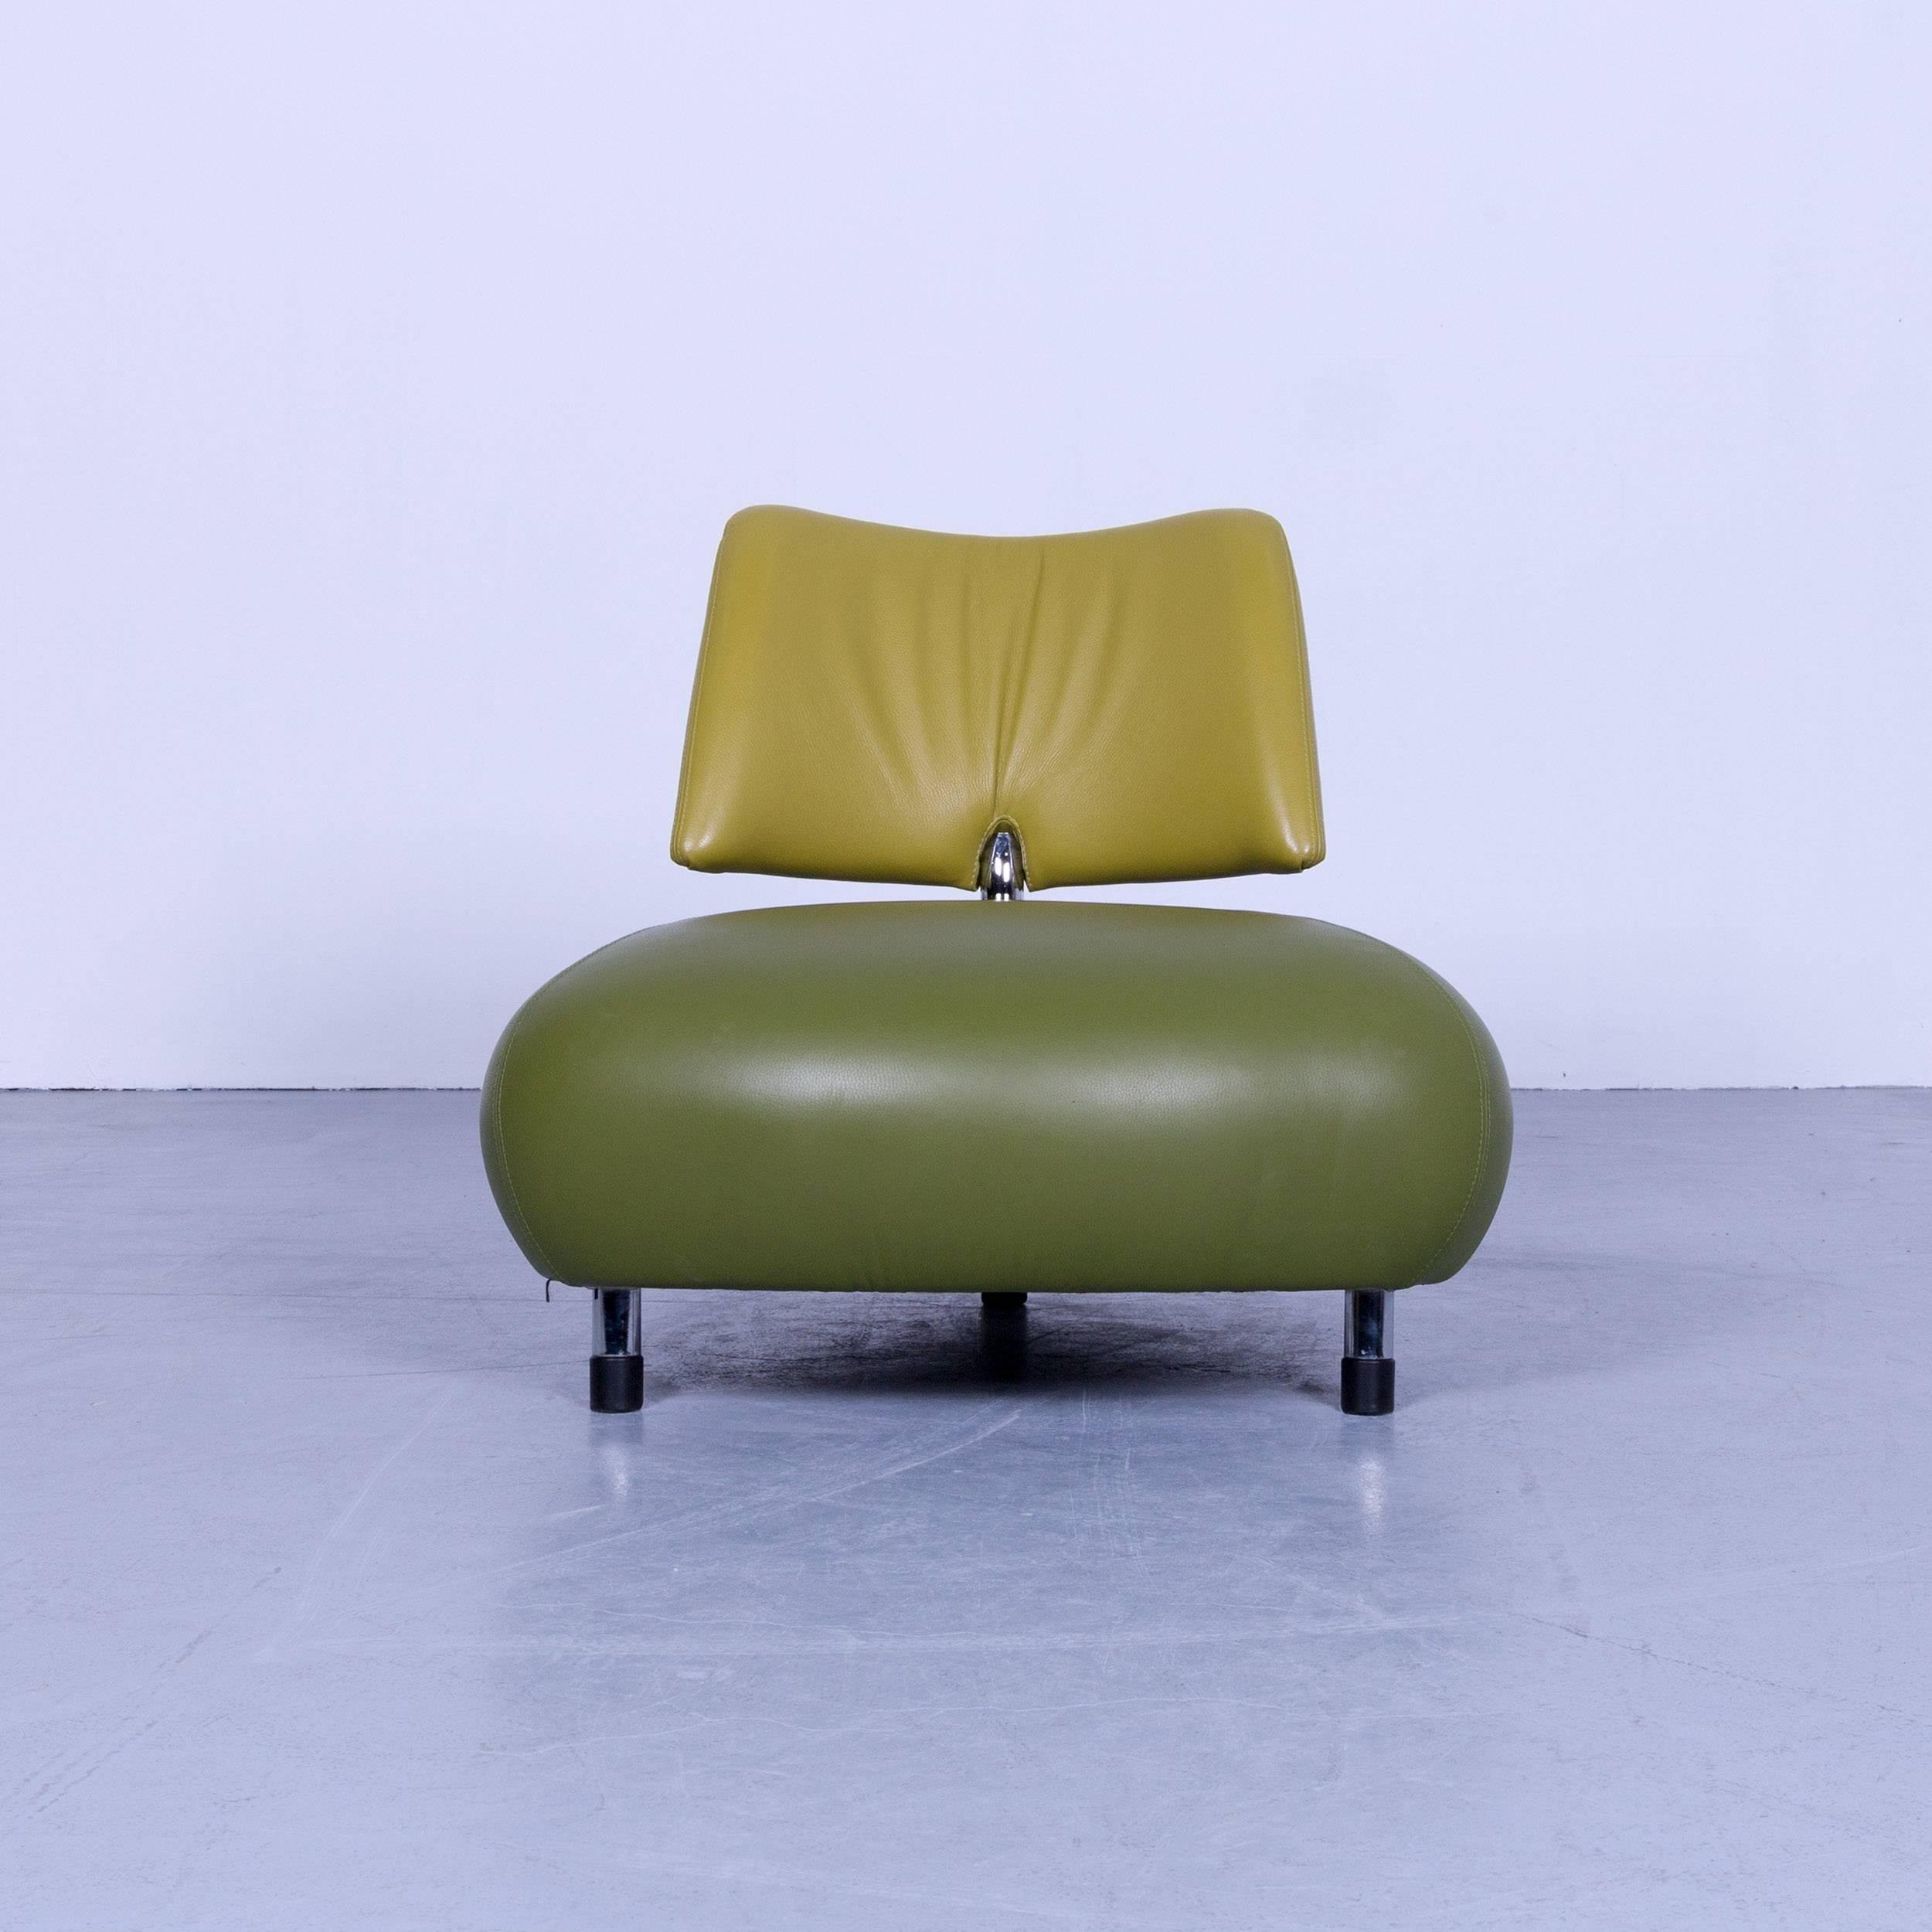 Green colored original Leolux Pallone Pa designer leather chair in a minimalistic and modern design, made for pure comfort.